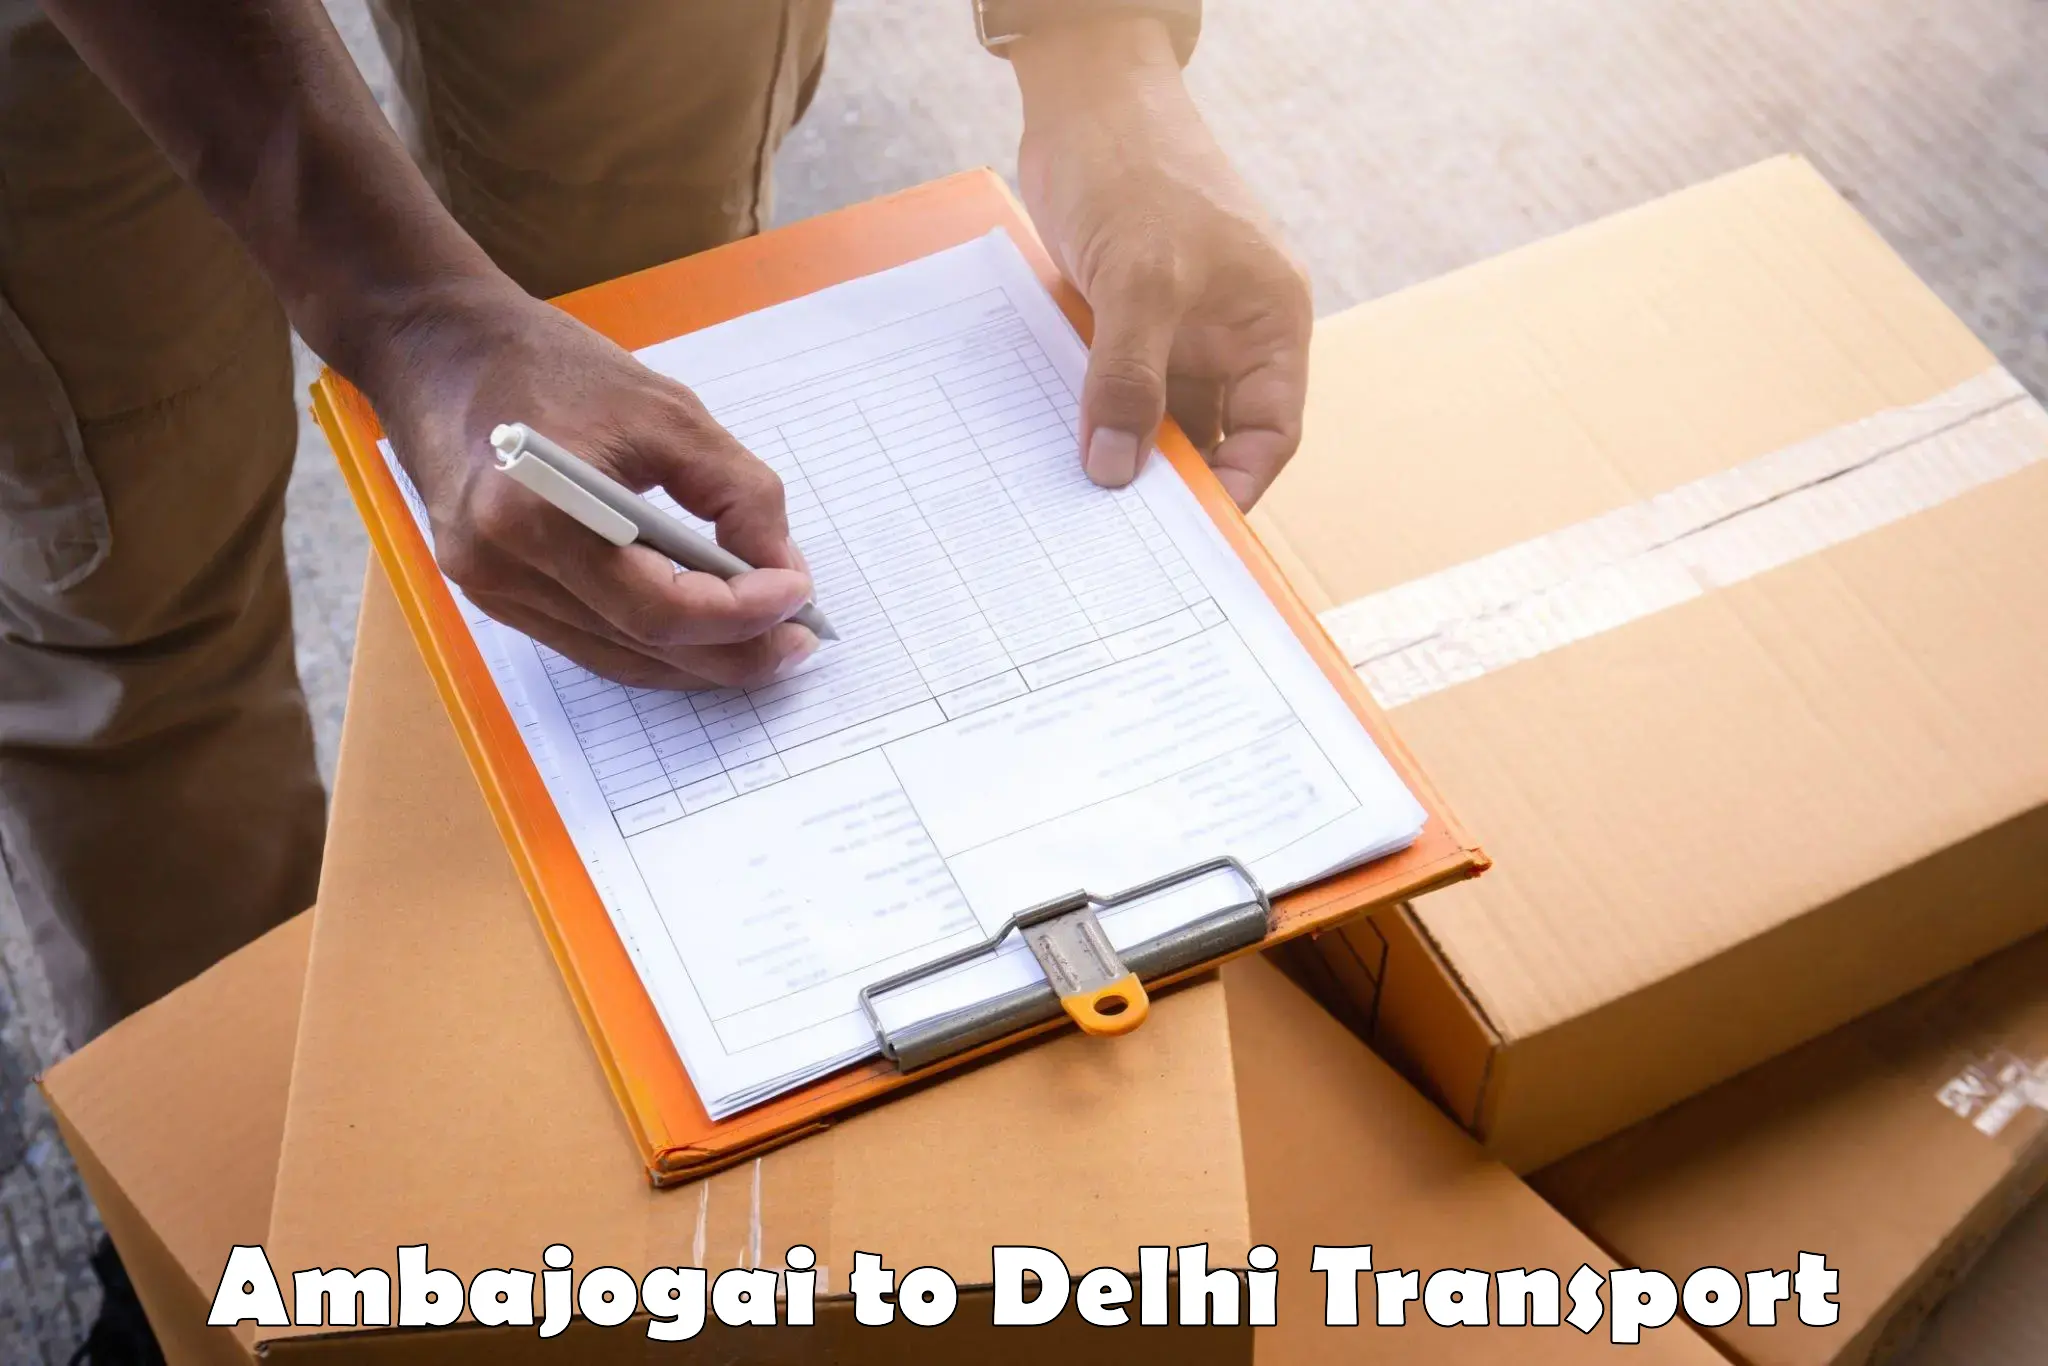 Truck transport companies in India Ambajogai to NCR